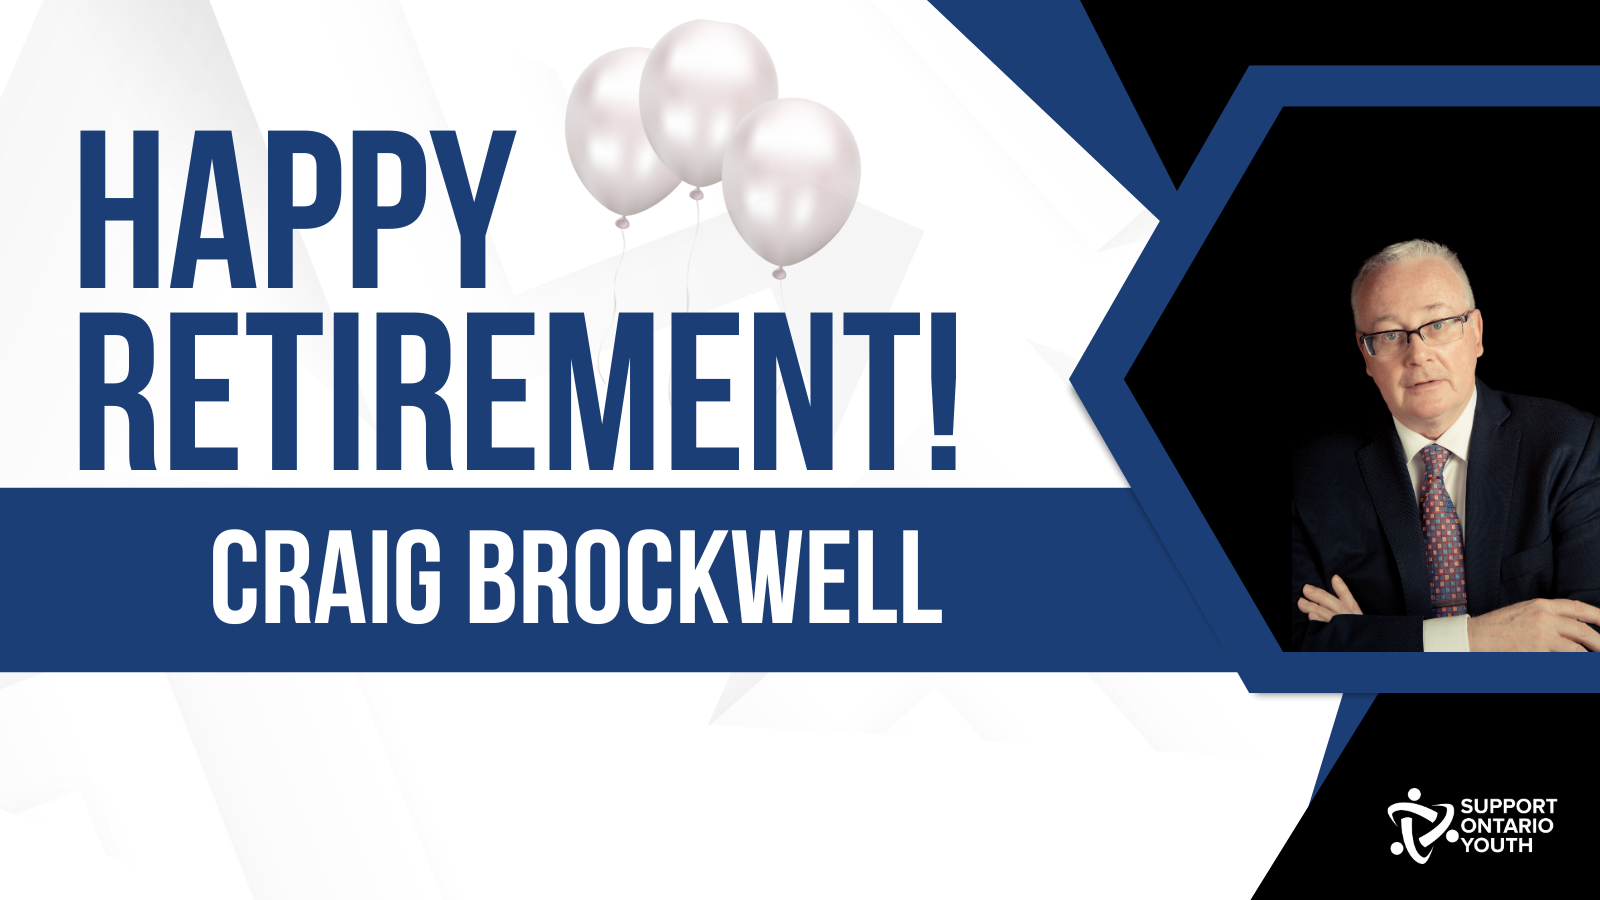 Support Ontario Youth Announces Craig Brockwell’s Retirement